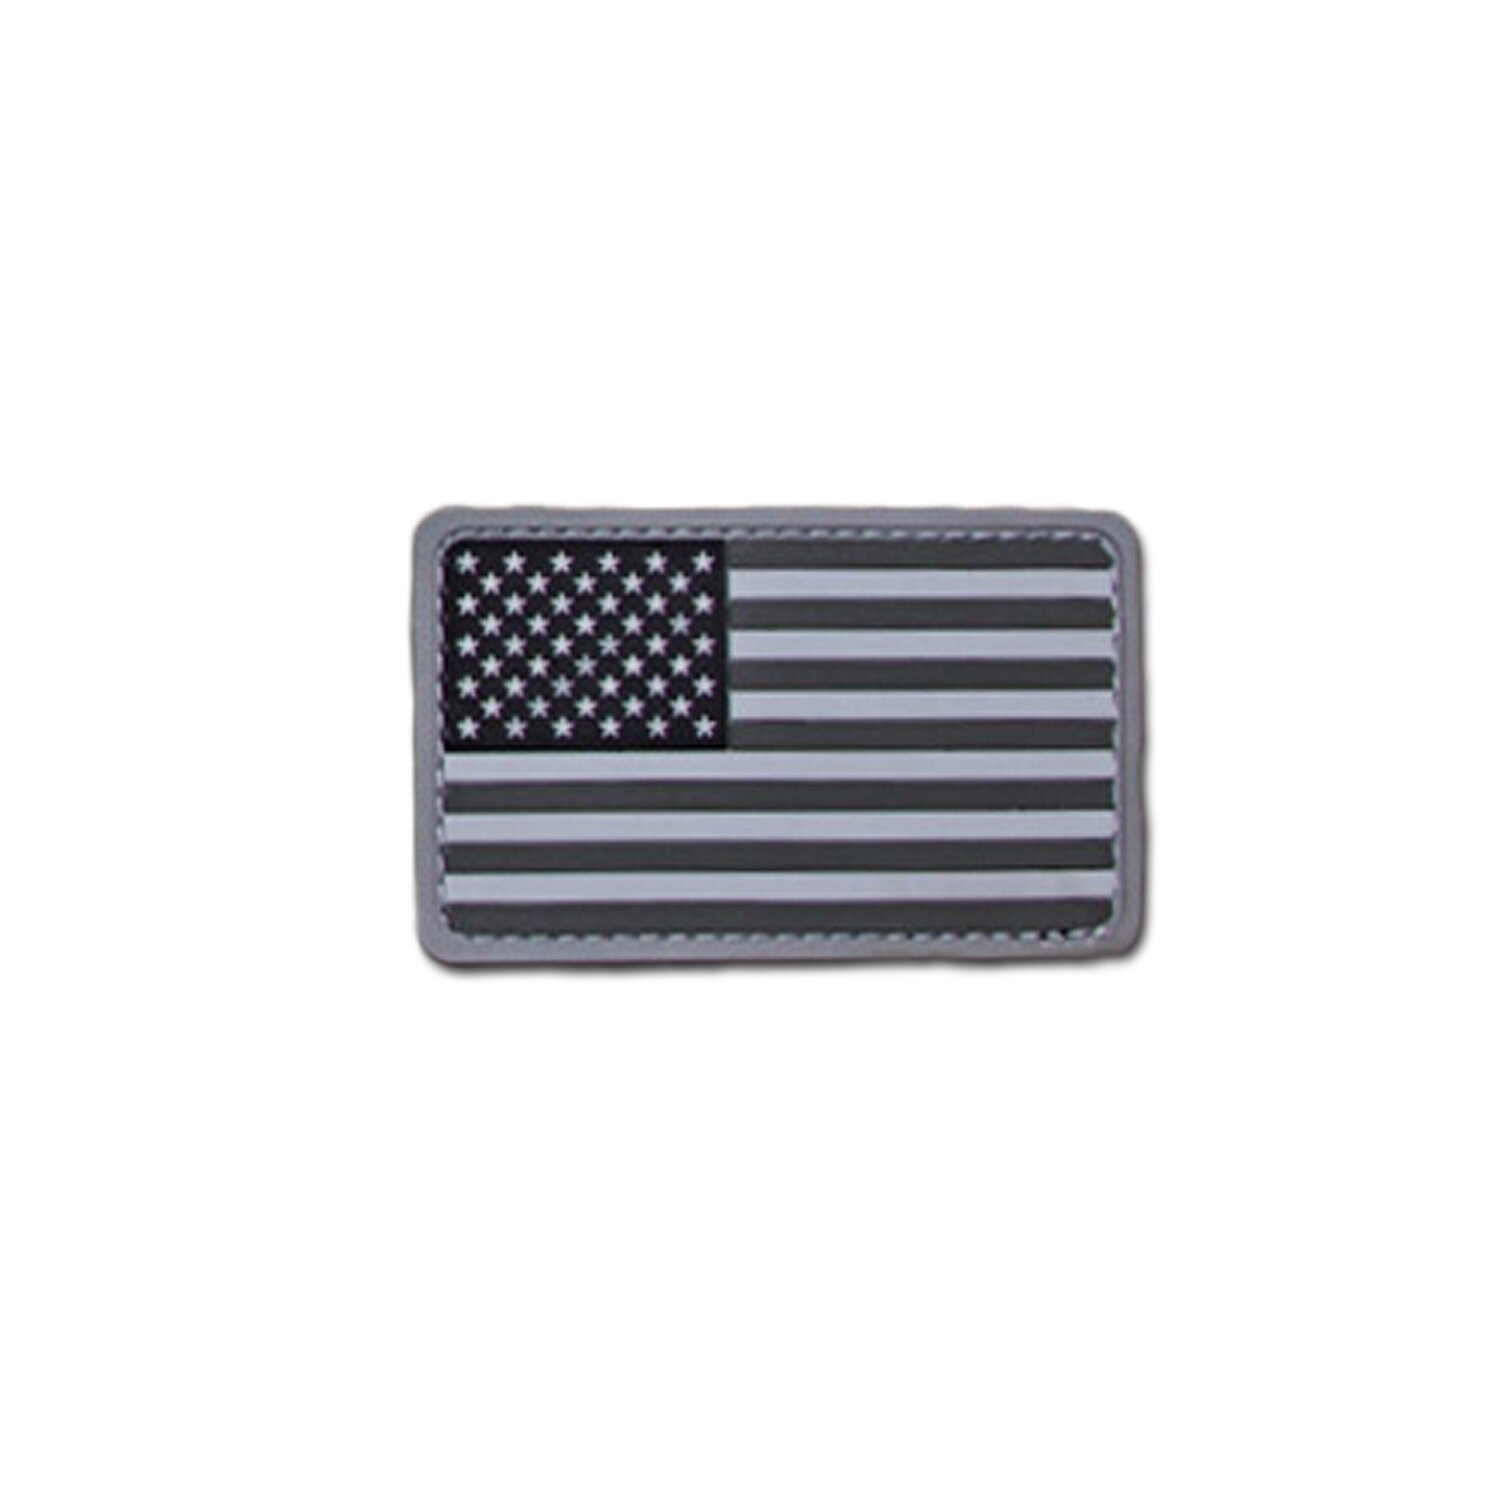 AMERICAN FLAG PATCH SWAT